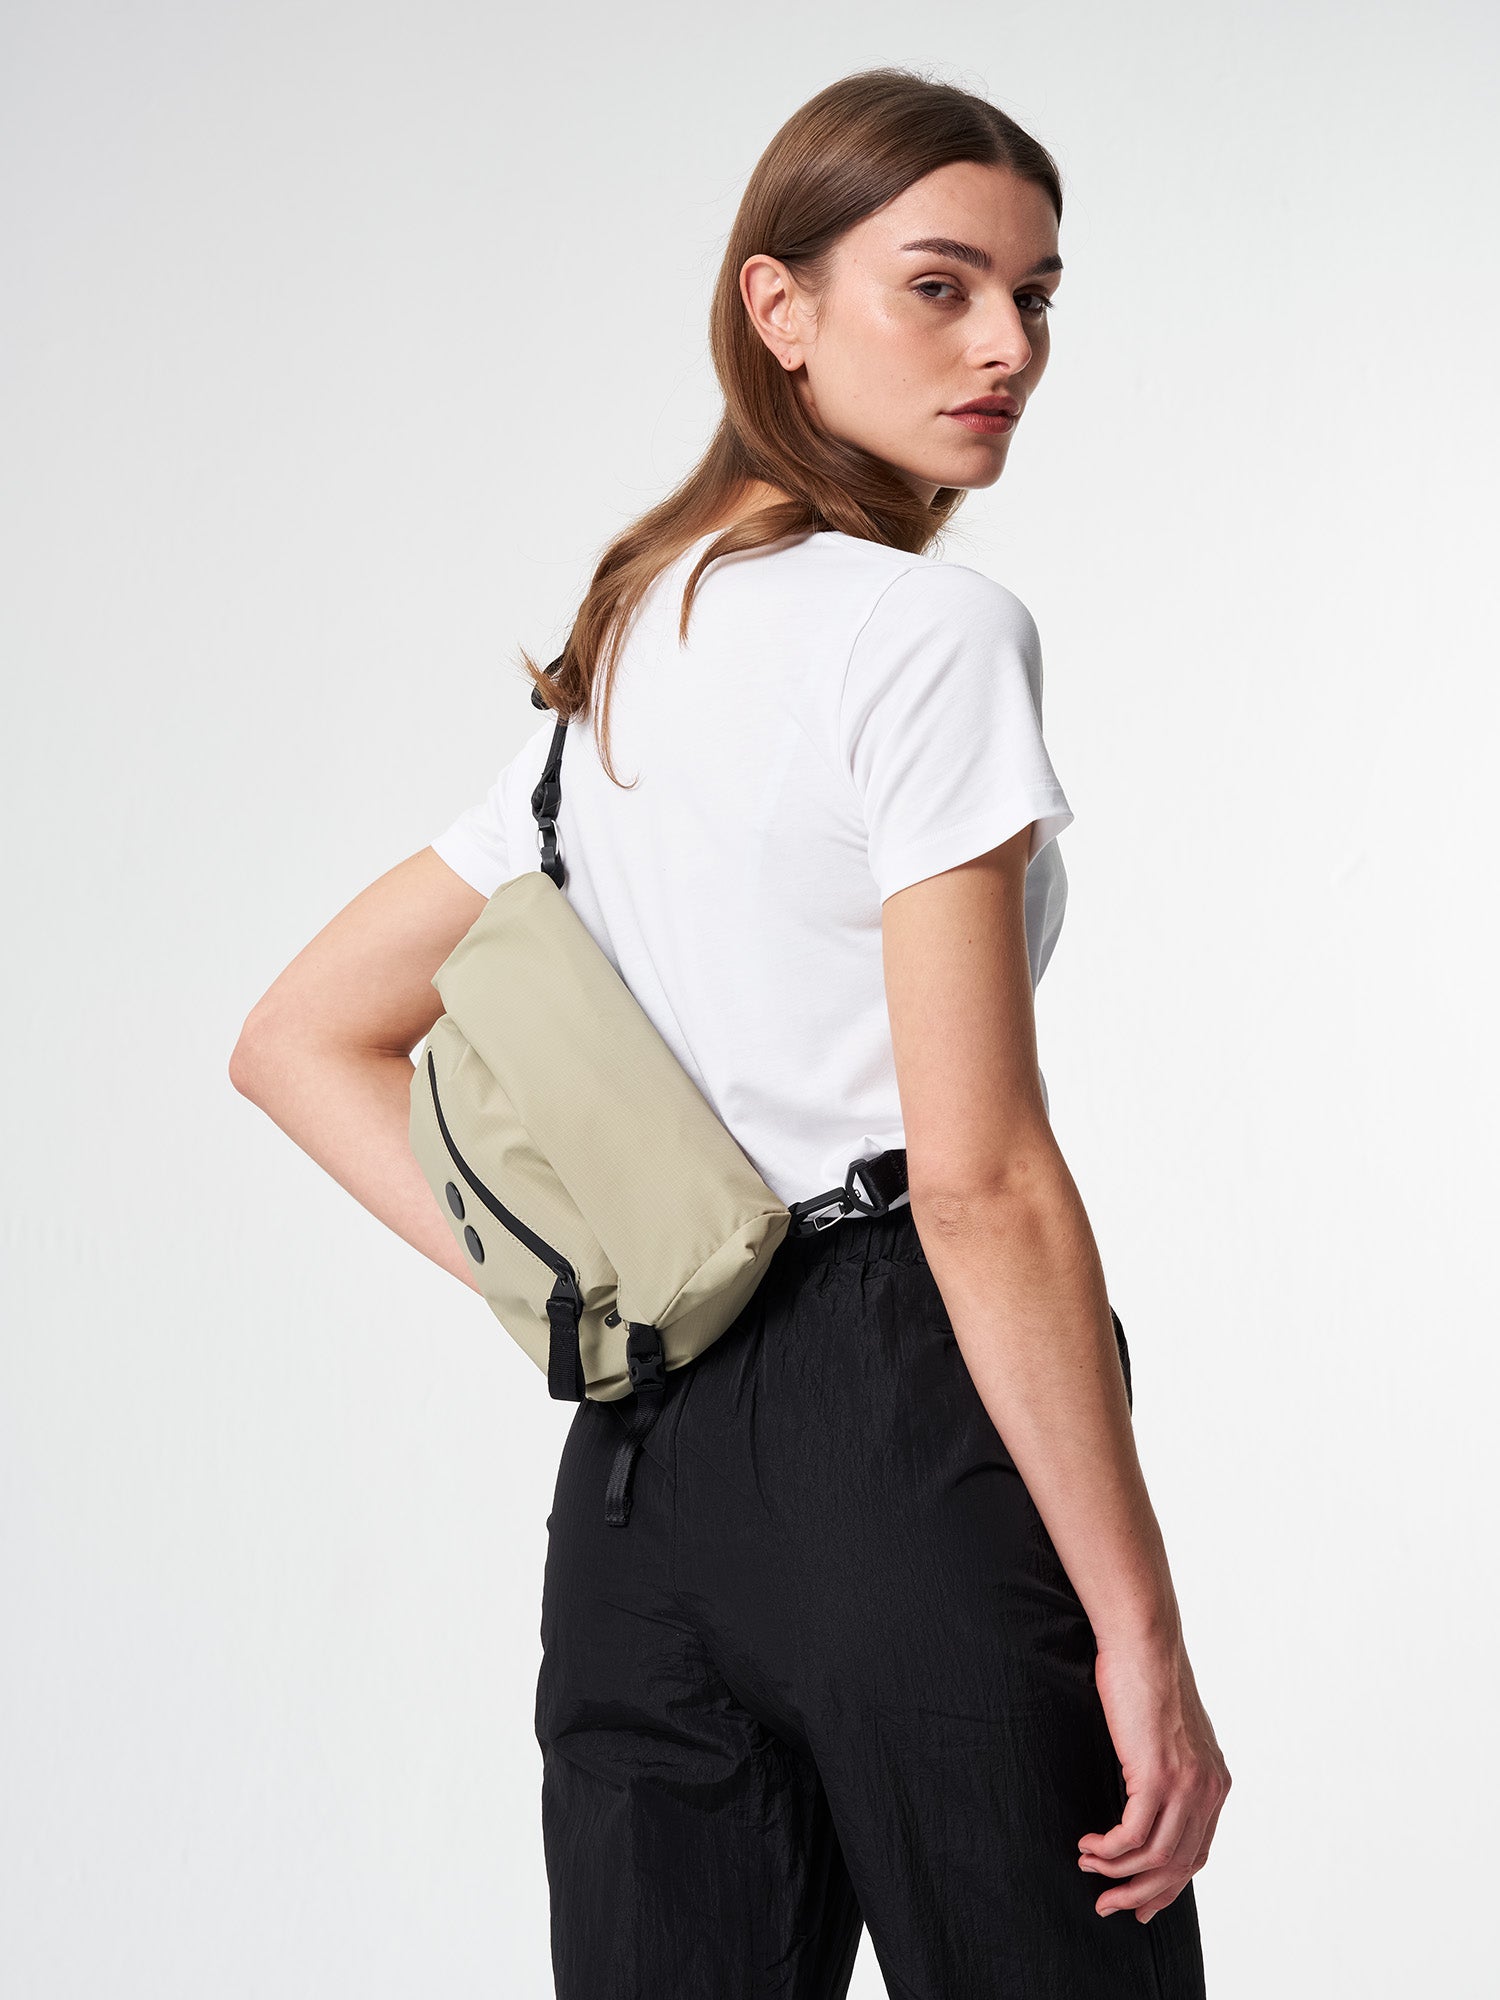 Aksel Hip – durable, Versatile, pinqponq ✓ Bag: sustainable and